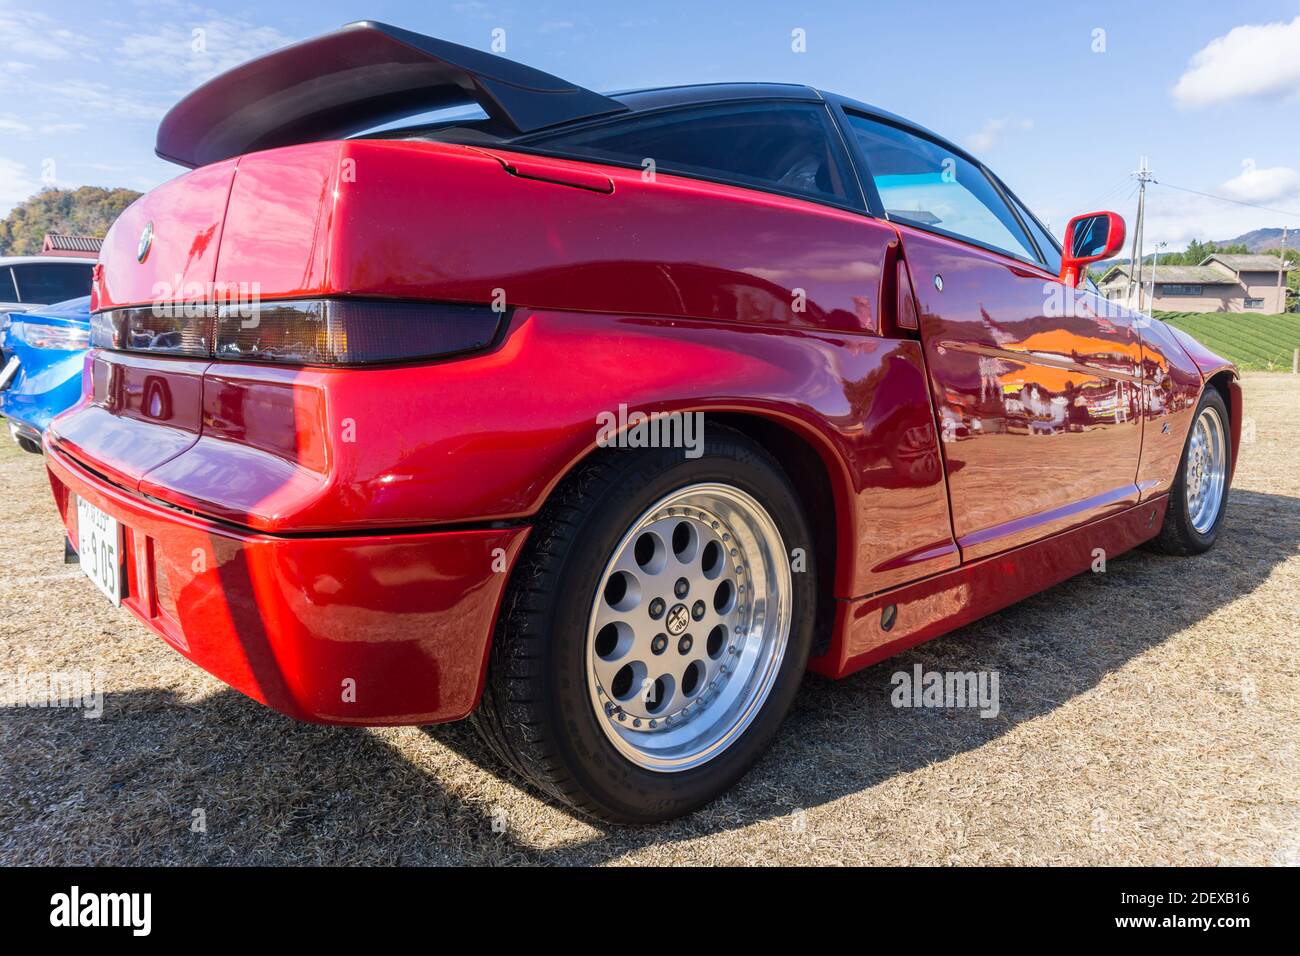 Rear view of a red Alfa Romeo SZ sports coupe outside in sunshine Stock Photo